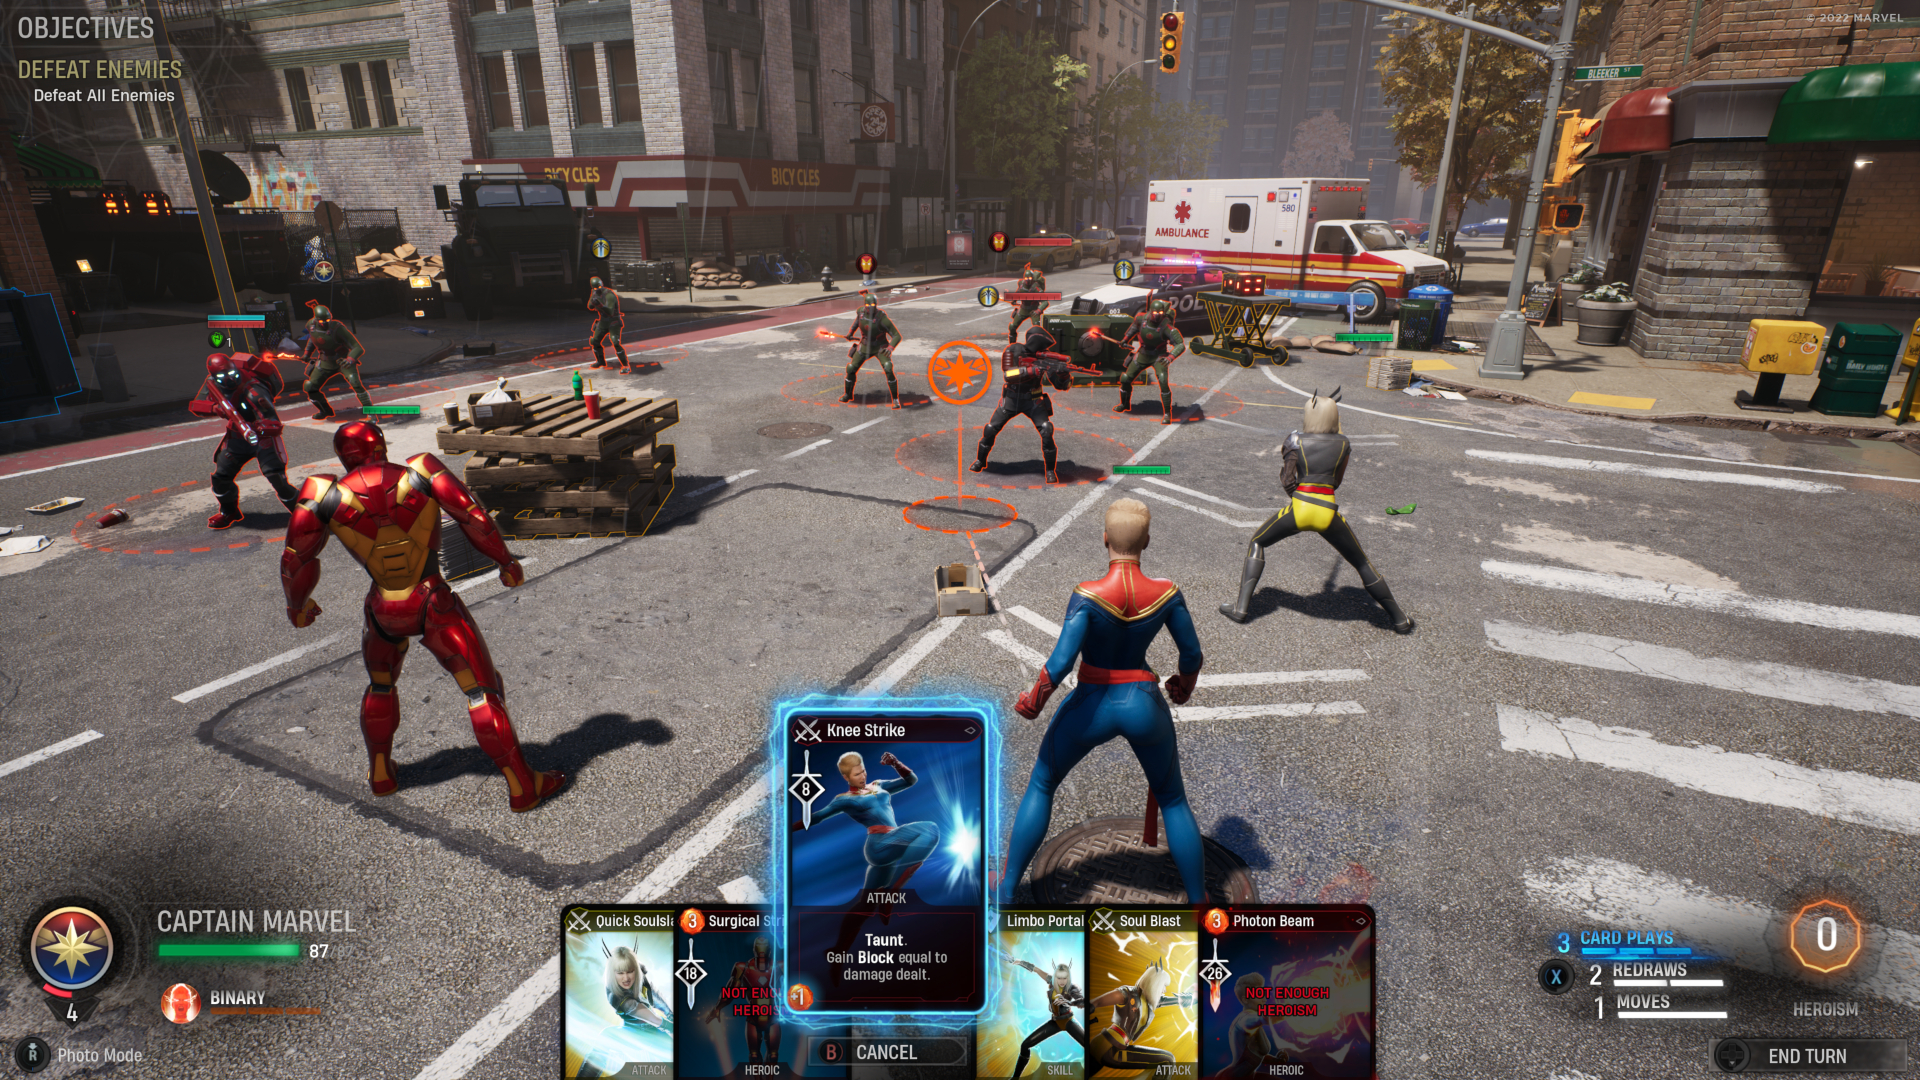 A screenshot of Marvel's Midnight Suns showing a team of superheroes and the game's card-based combat